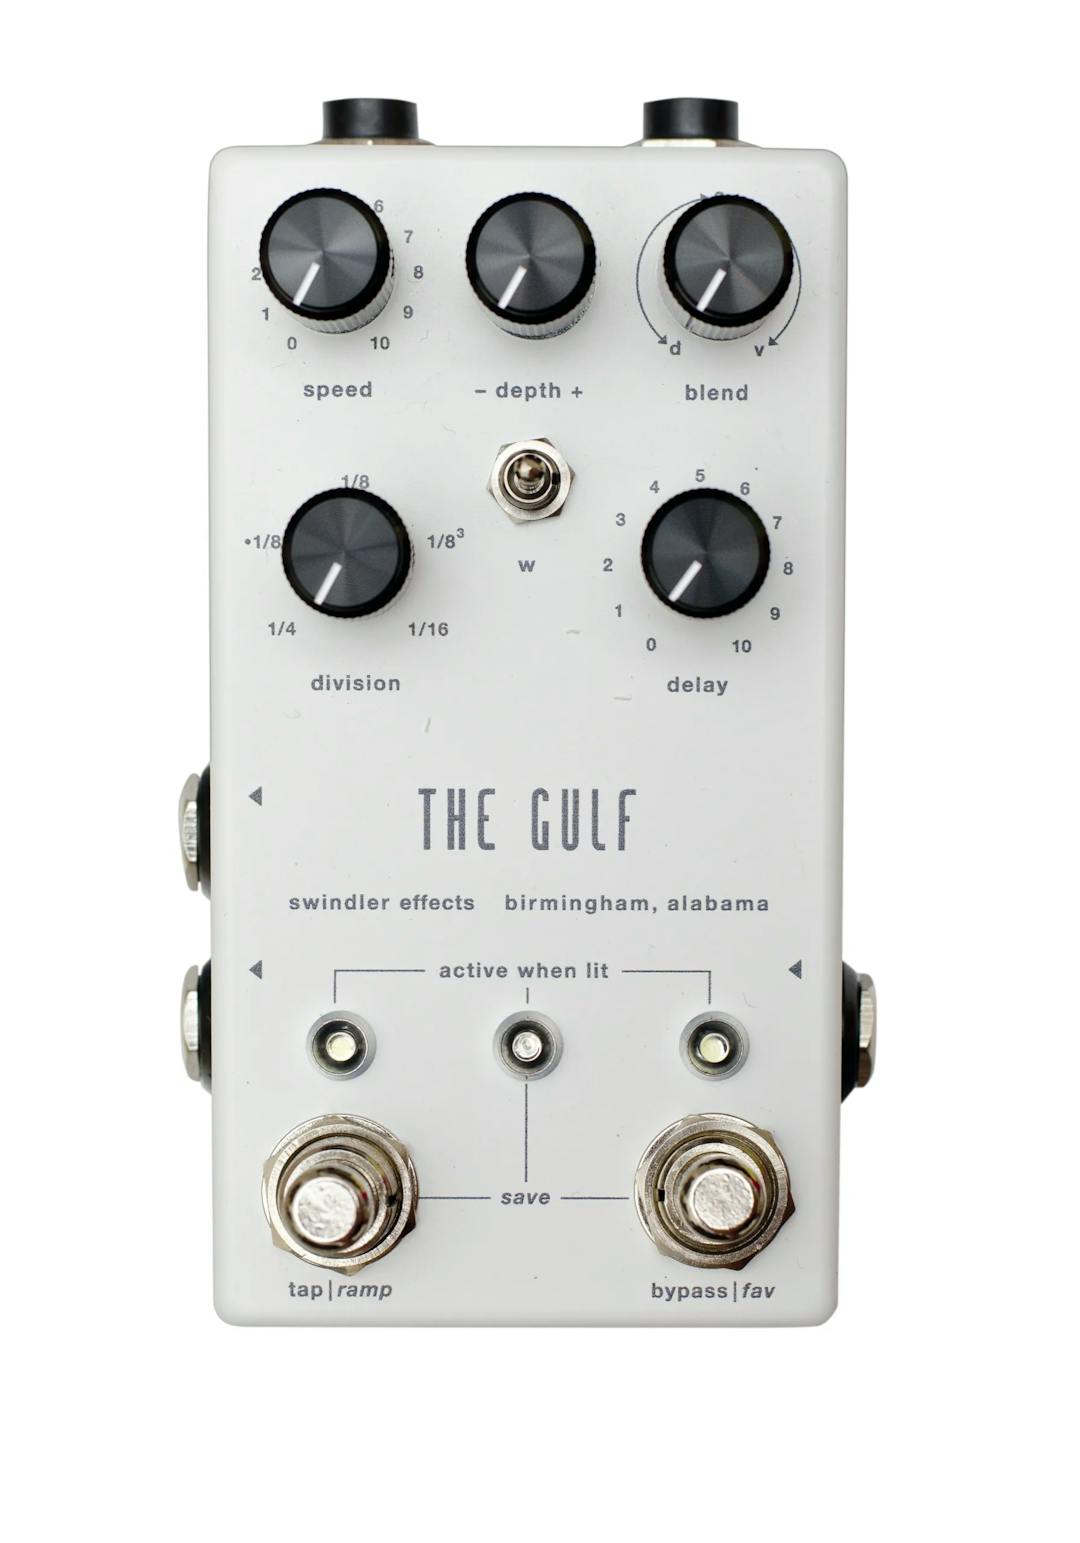 The Gulf Guitar Pedal By Swindler Effects